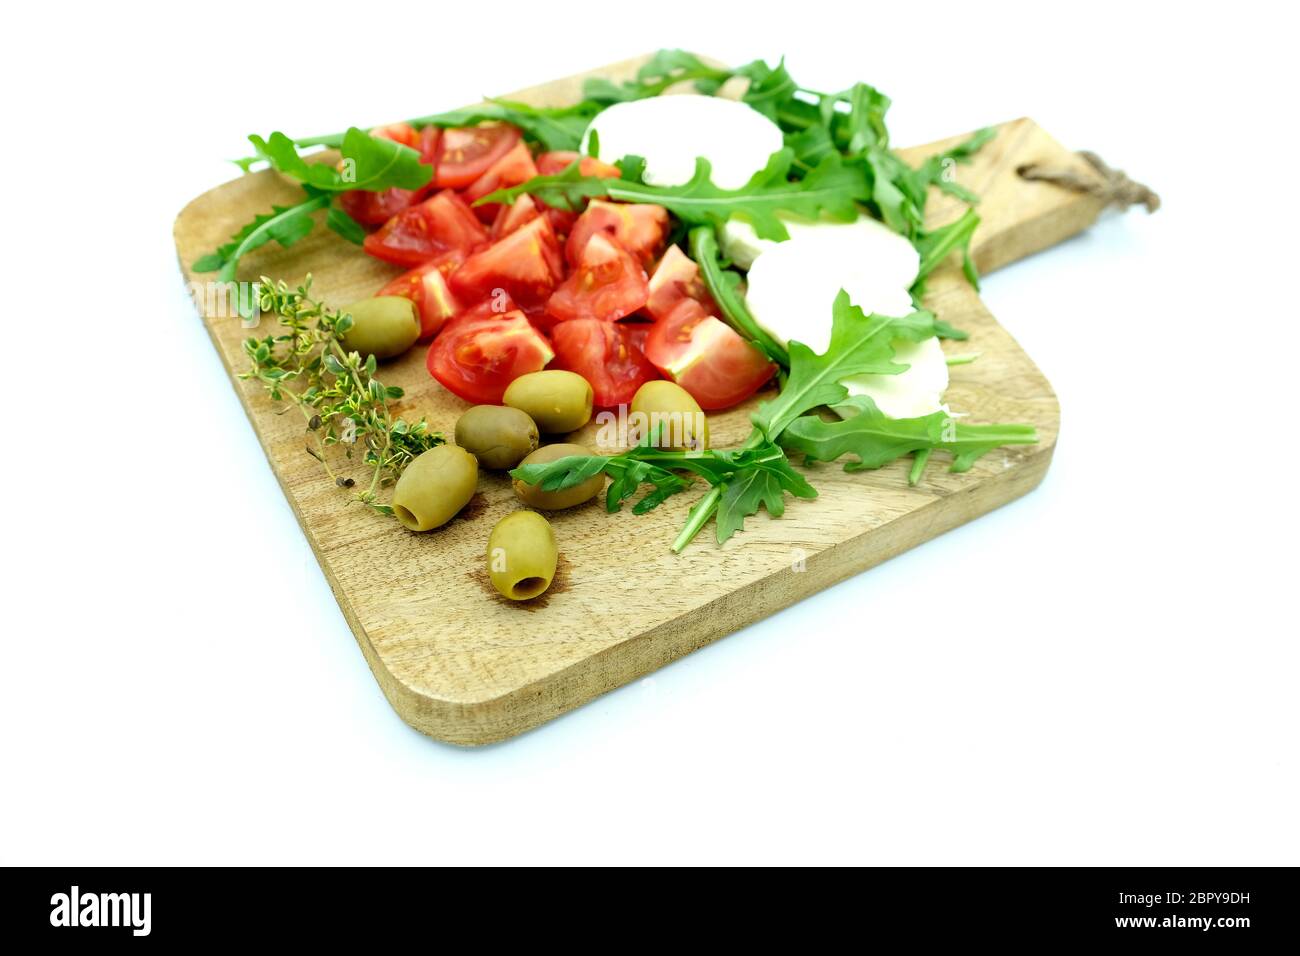 Wooden Board With Tomatoes, olives, mozzarella and rucola Stock Photo